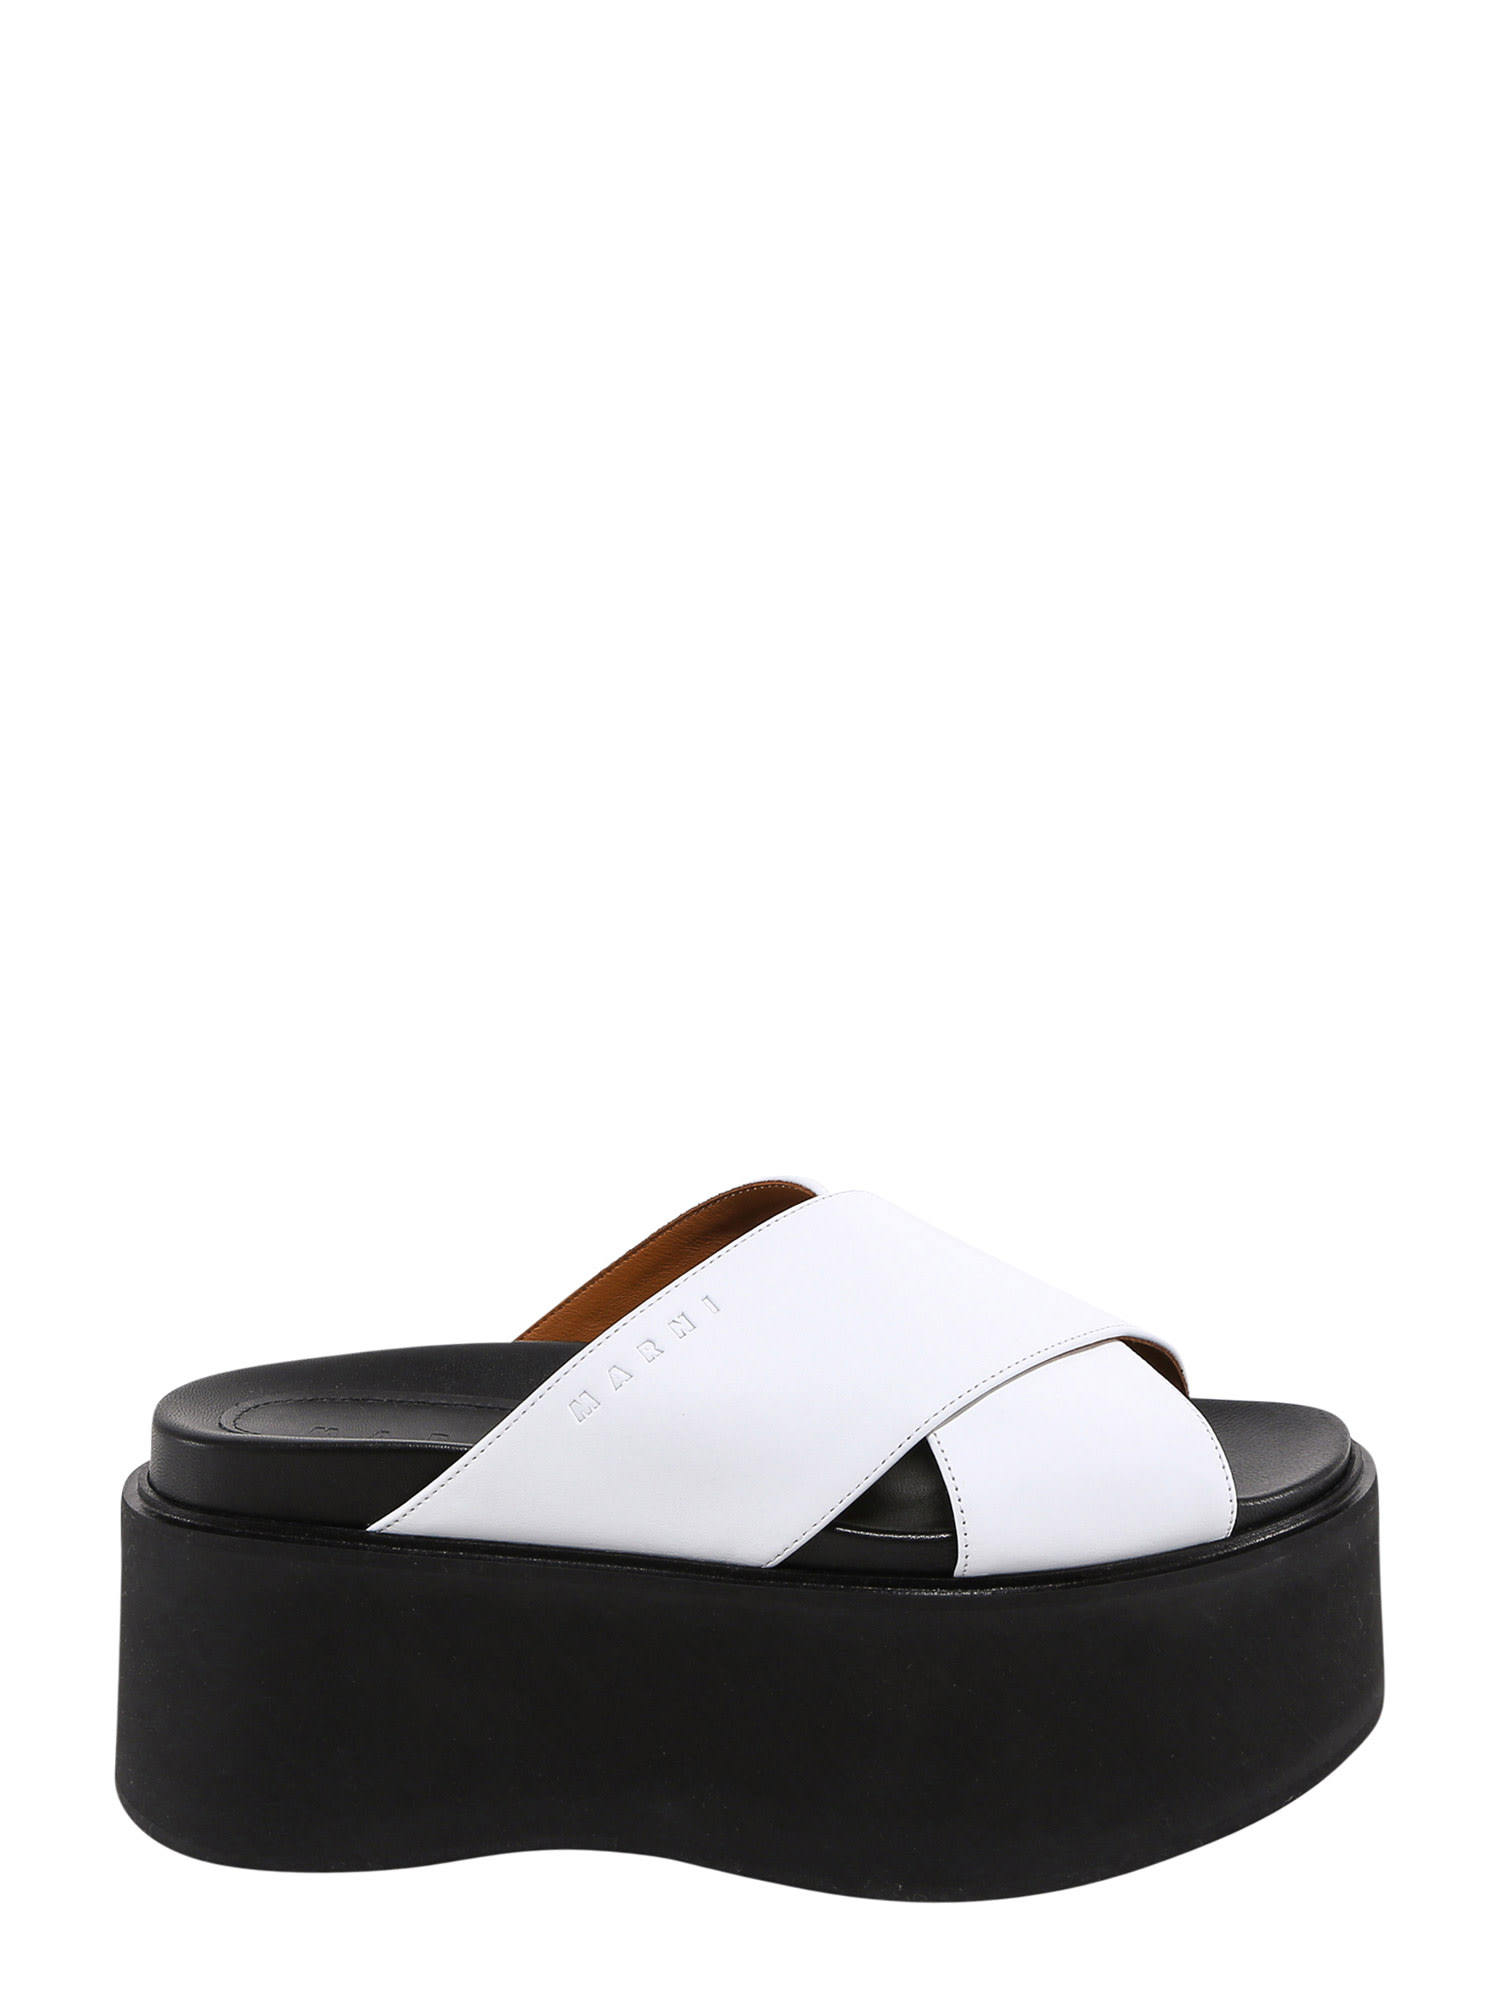 Buy Marni Sandals online, shop Marni shoes with free shipping